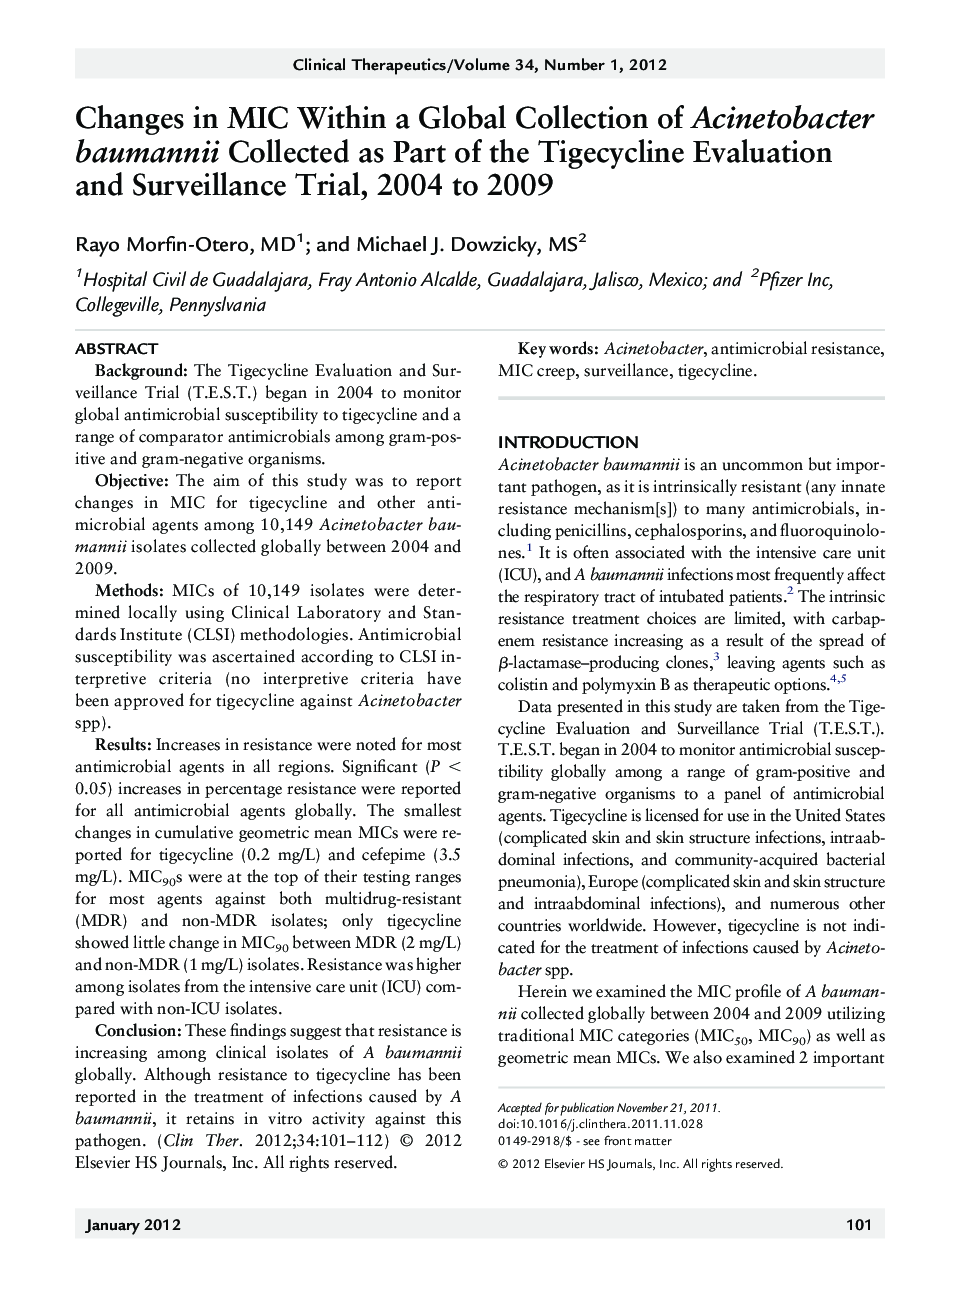 Changes in MIC Within a Global Collection of Acinetobacter baumannii Collected as Part of the Tigecycline Evaluation and Surveillance Trial, 2004 to 2009